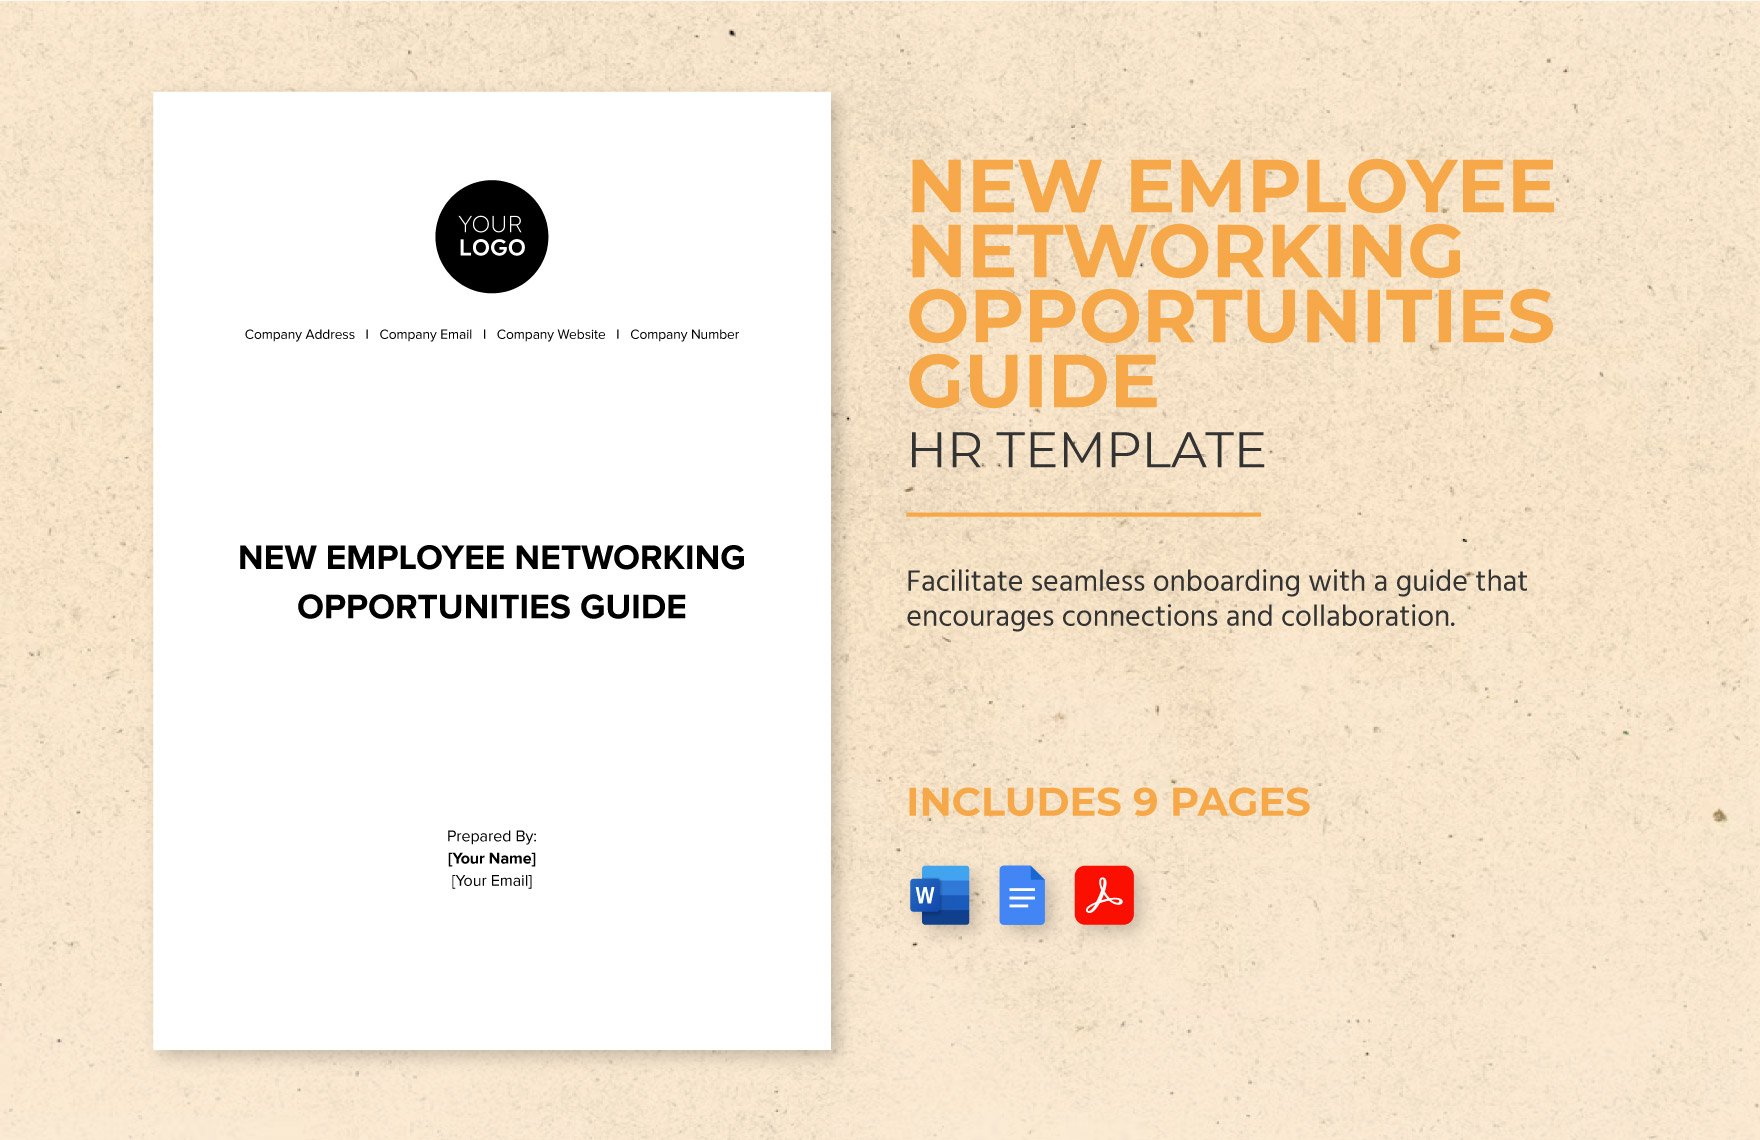 New Employee Networking Opportunities Guide HR Template in Word, Google Docs, PDF